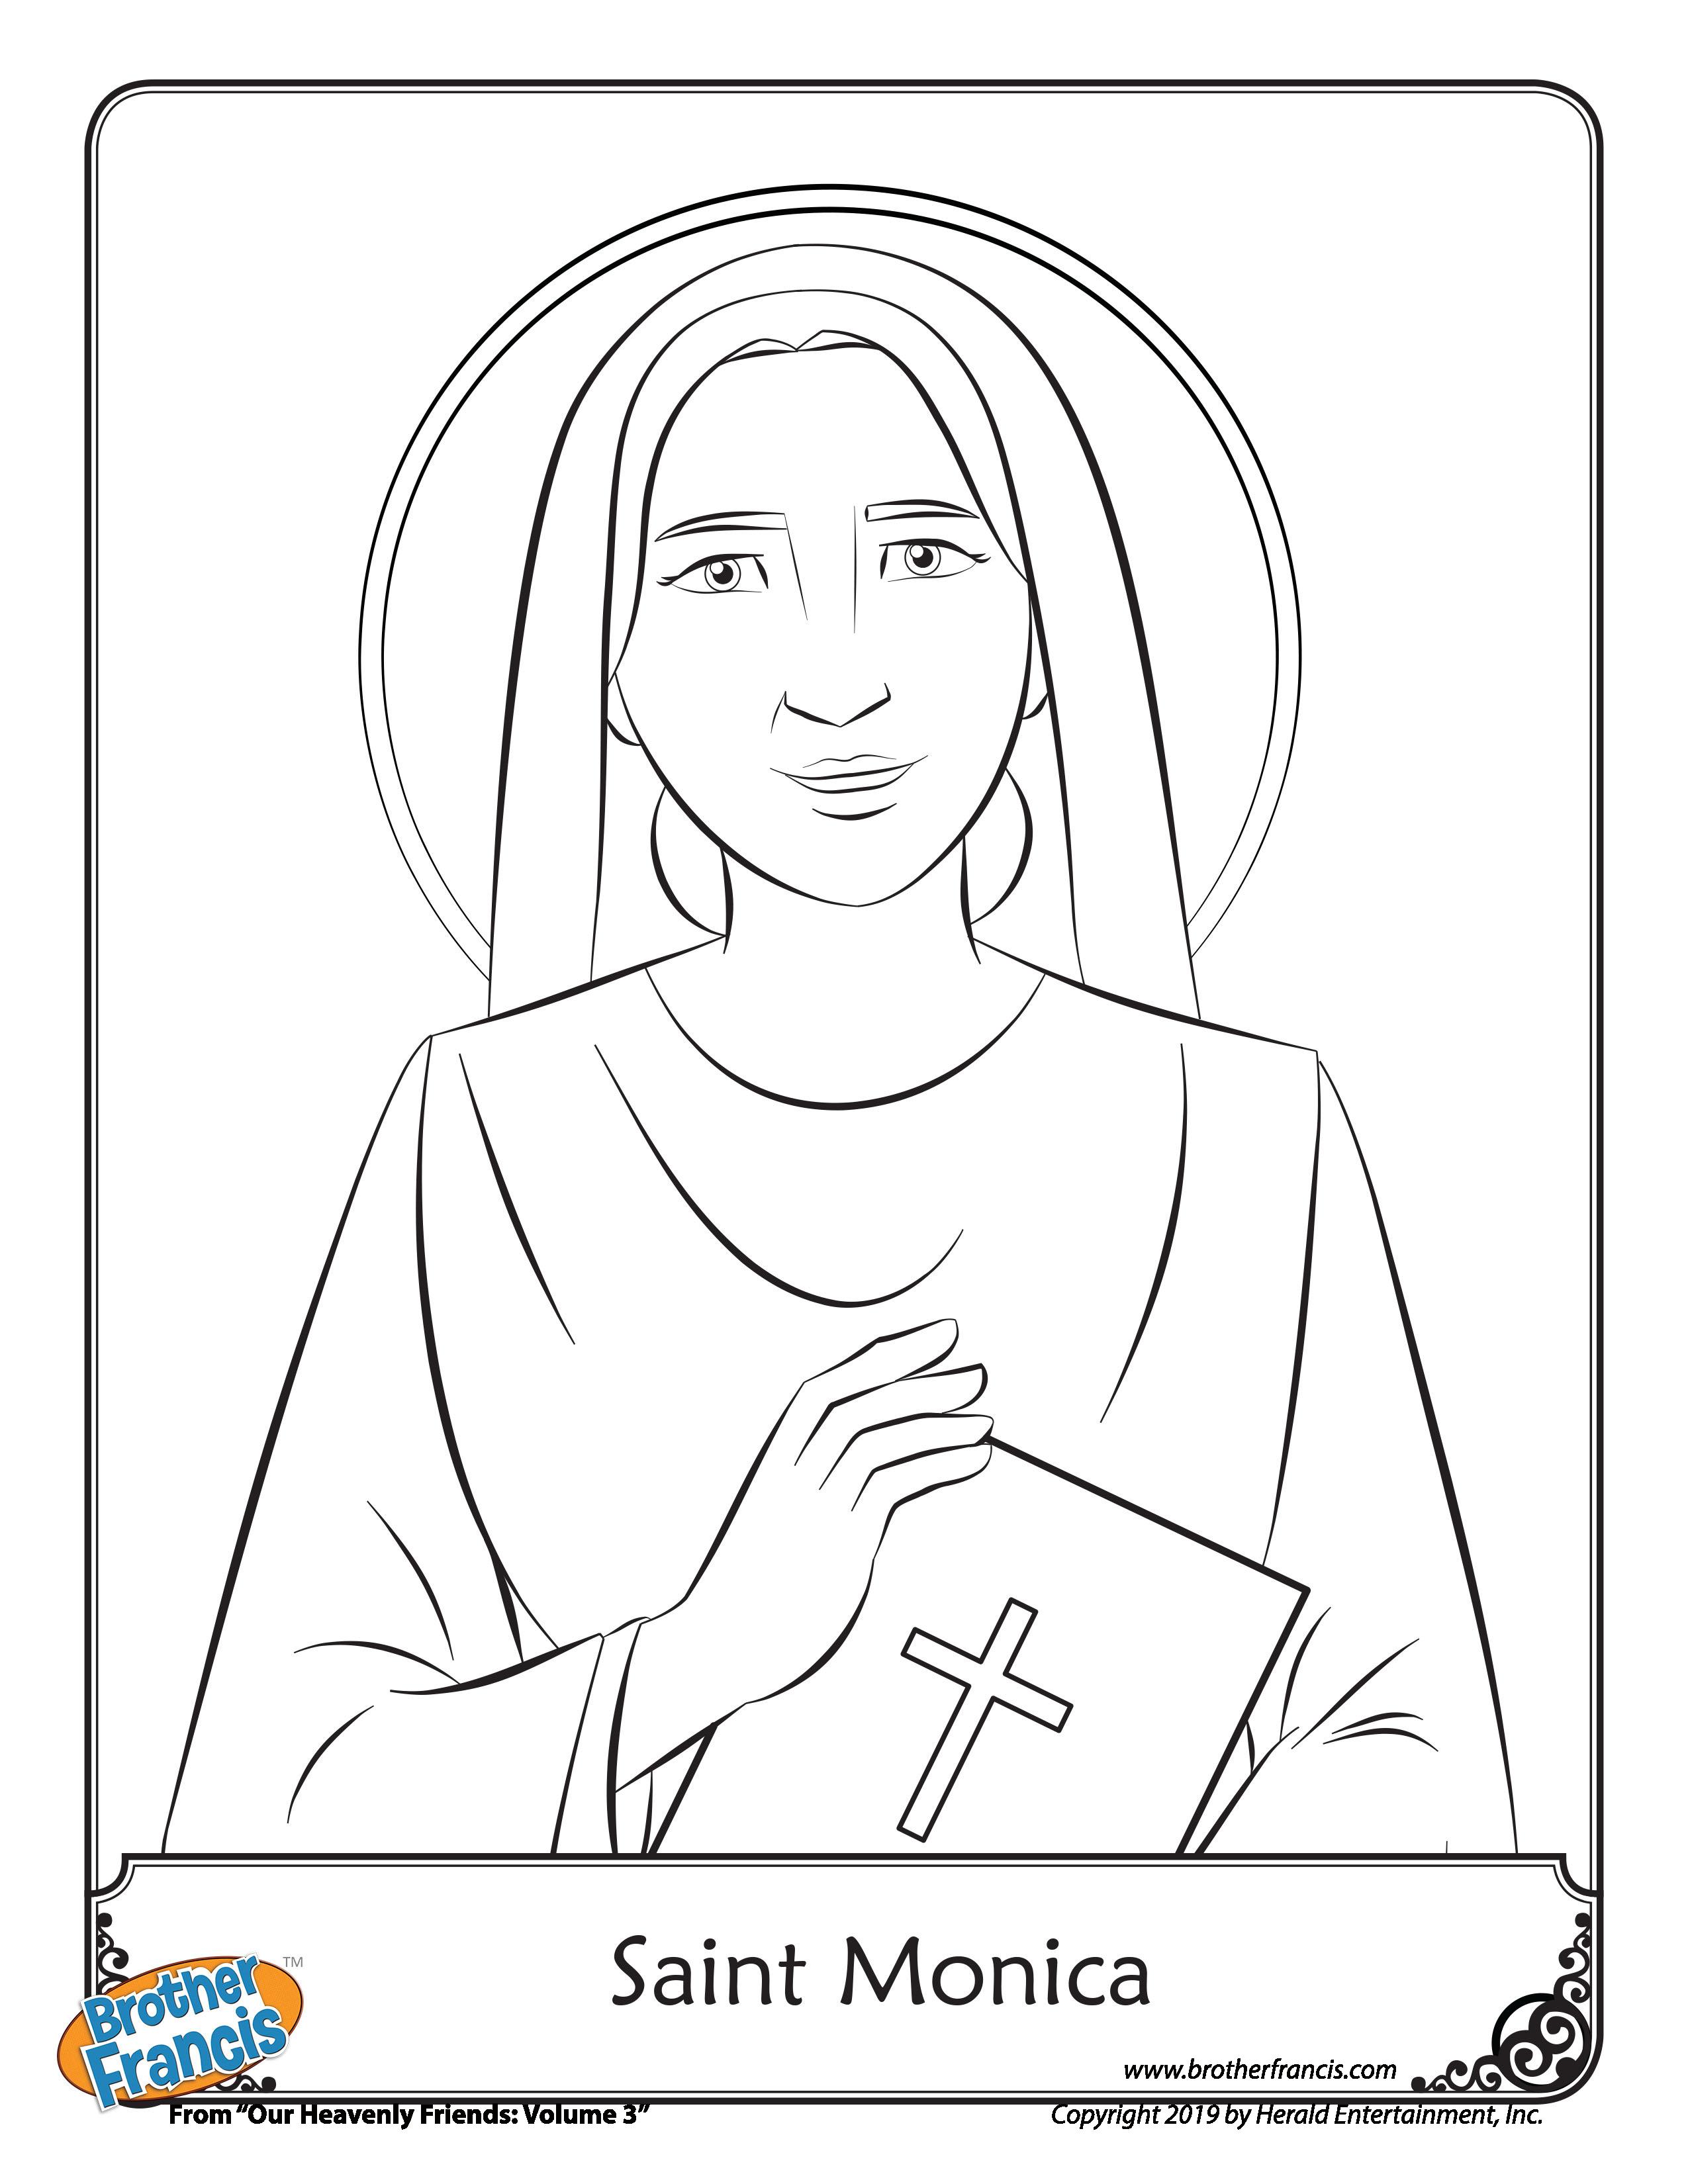 Colouring Page_saint-monica-coloring-page-brother-francis-page-001